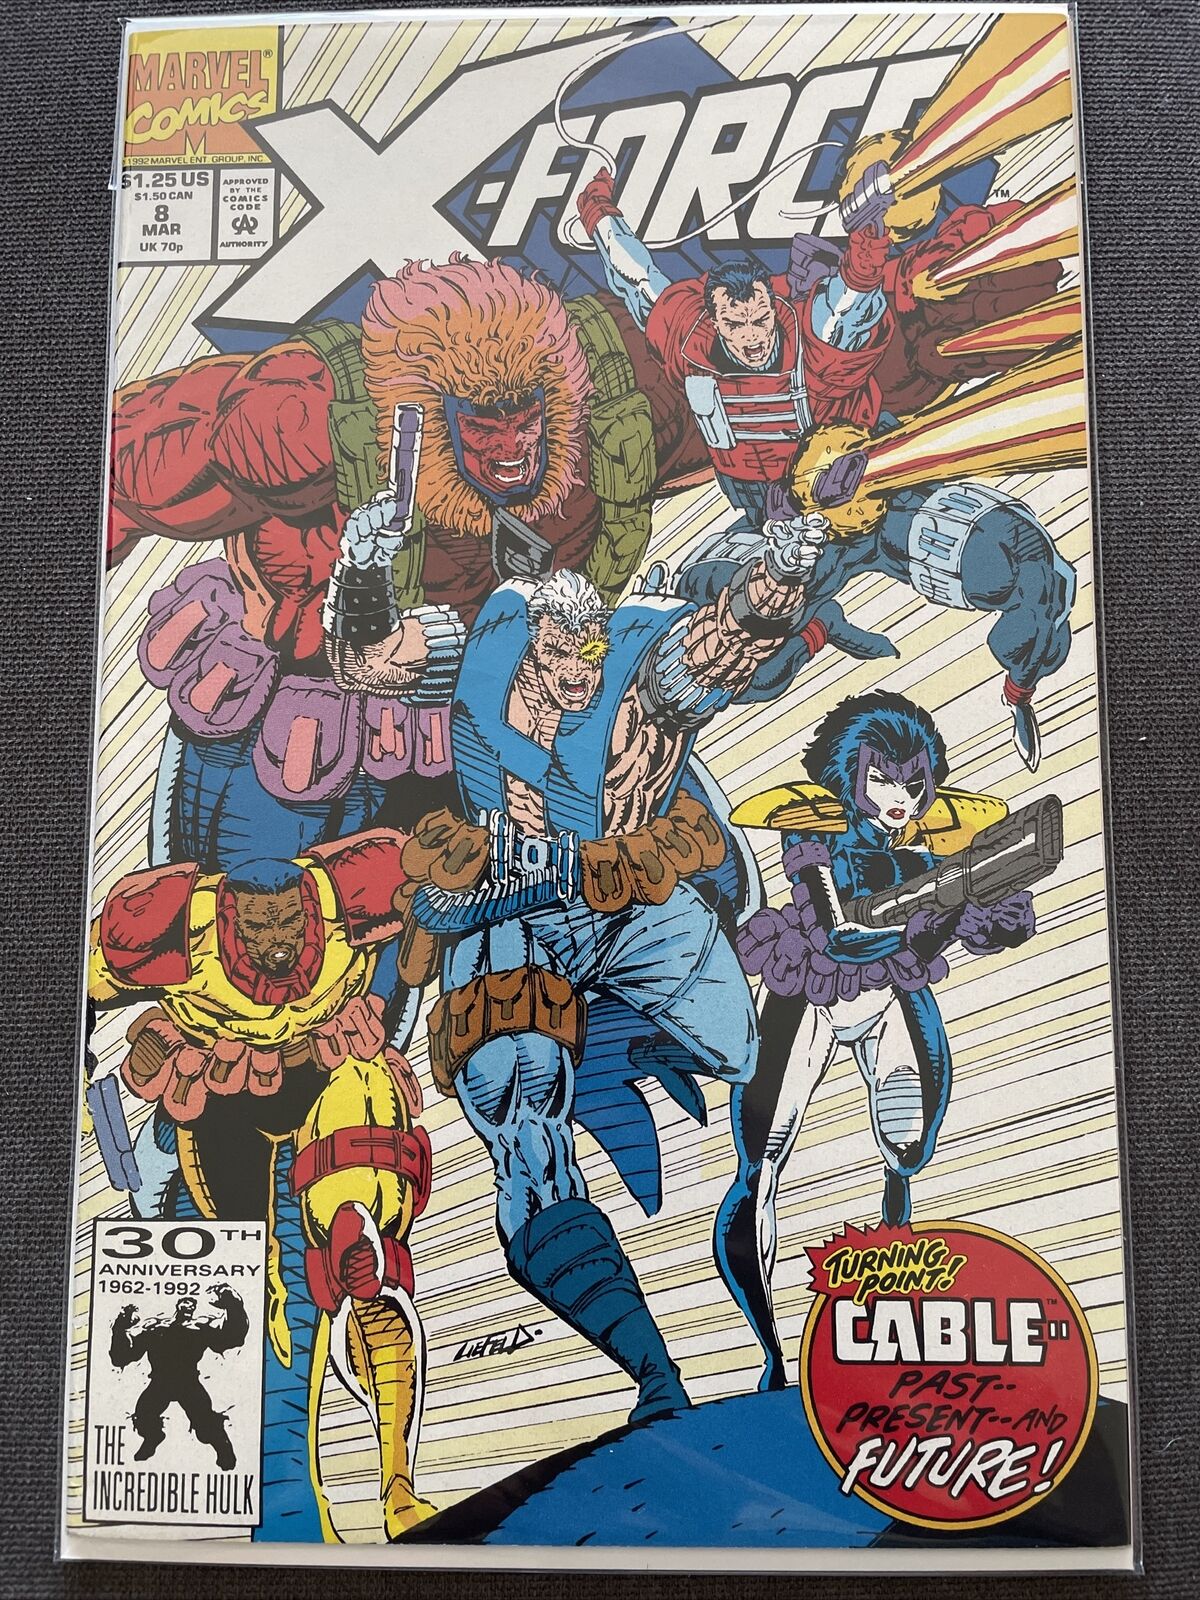 Marvel - X-FORCE #8 (Great Condition) bagged and boarded